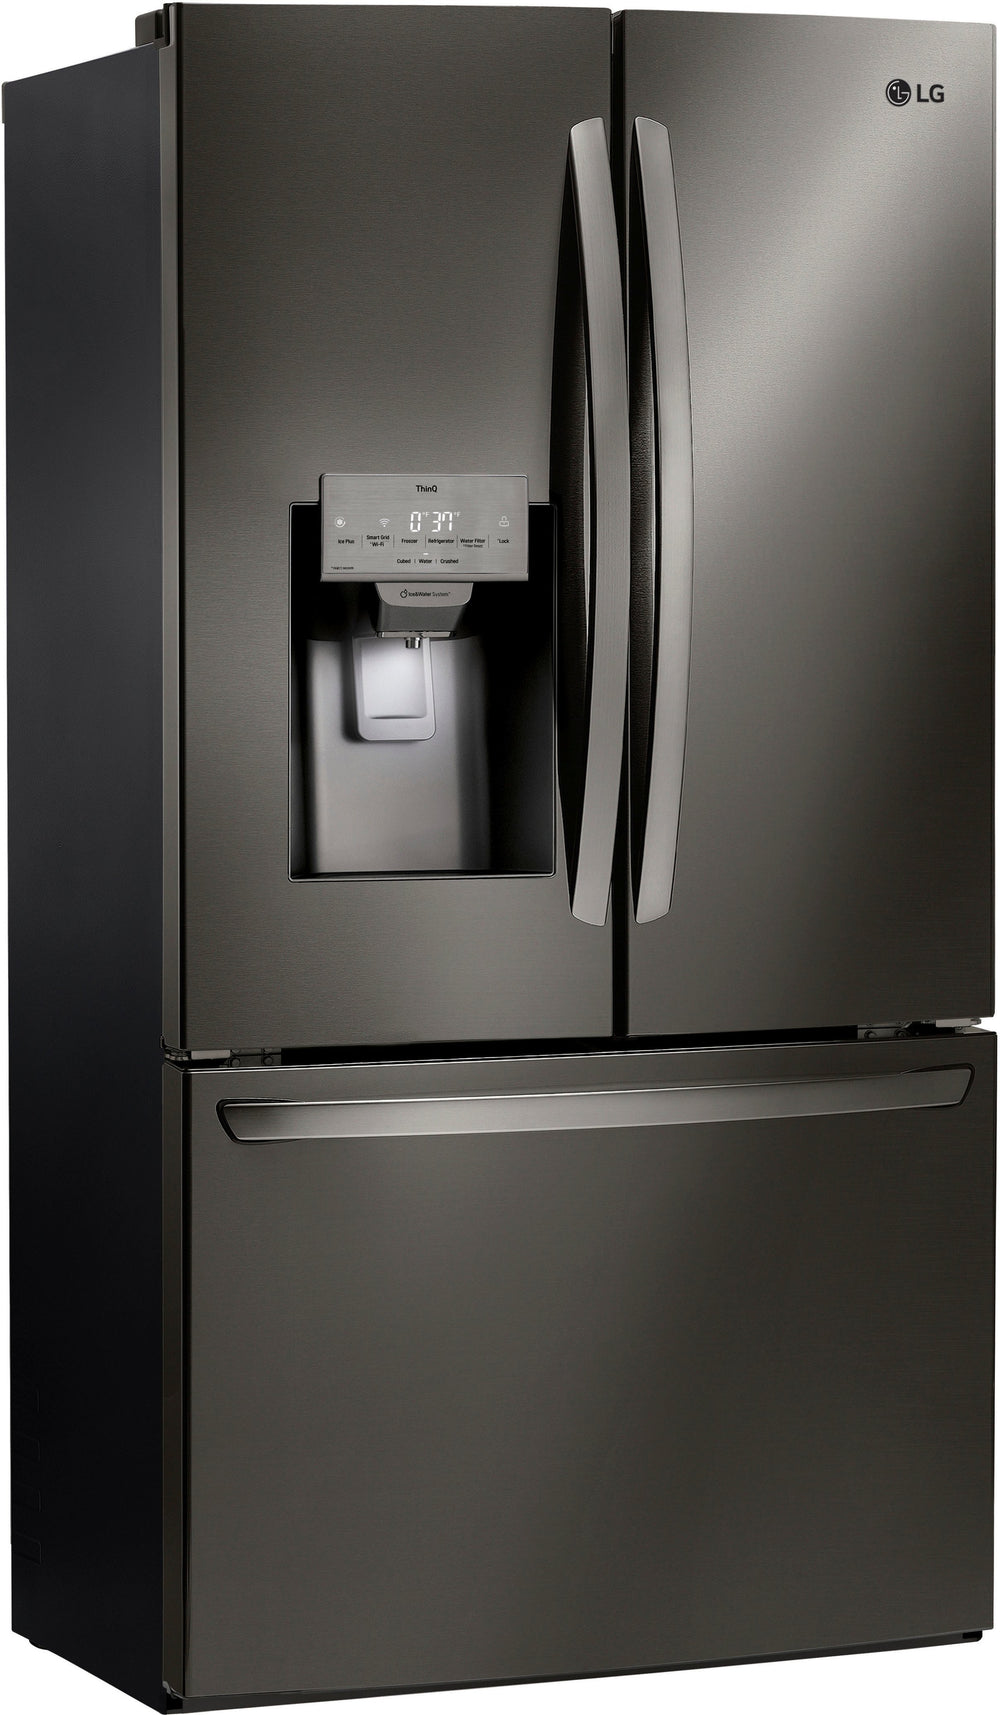 LG - 27.7 Cu. Ft. French Door Smart Refrigerator with External Ice and Water - Black Stainless Steel_1